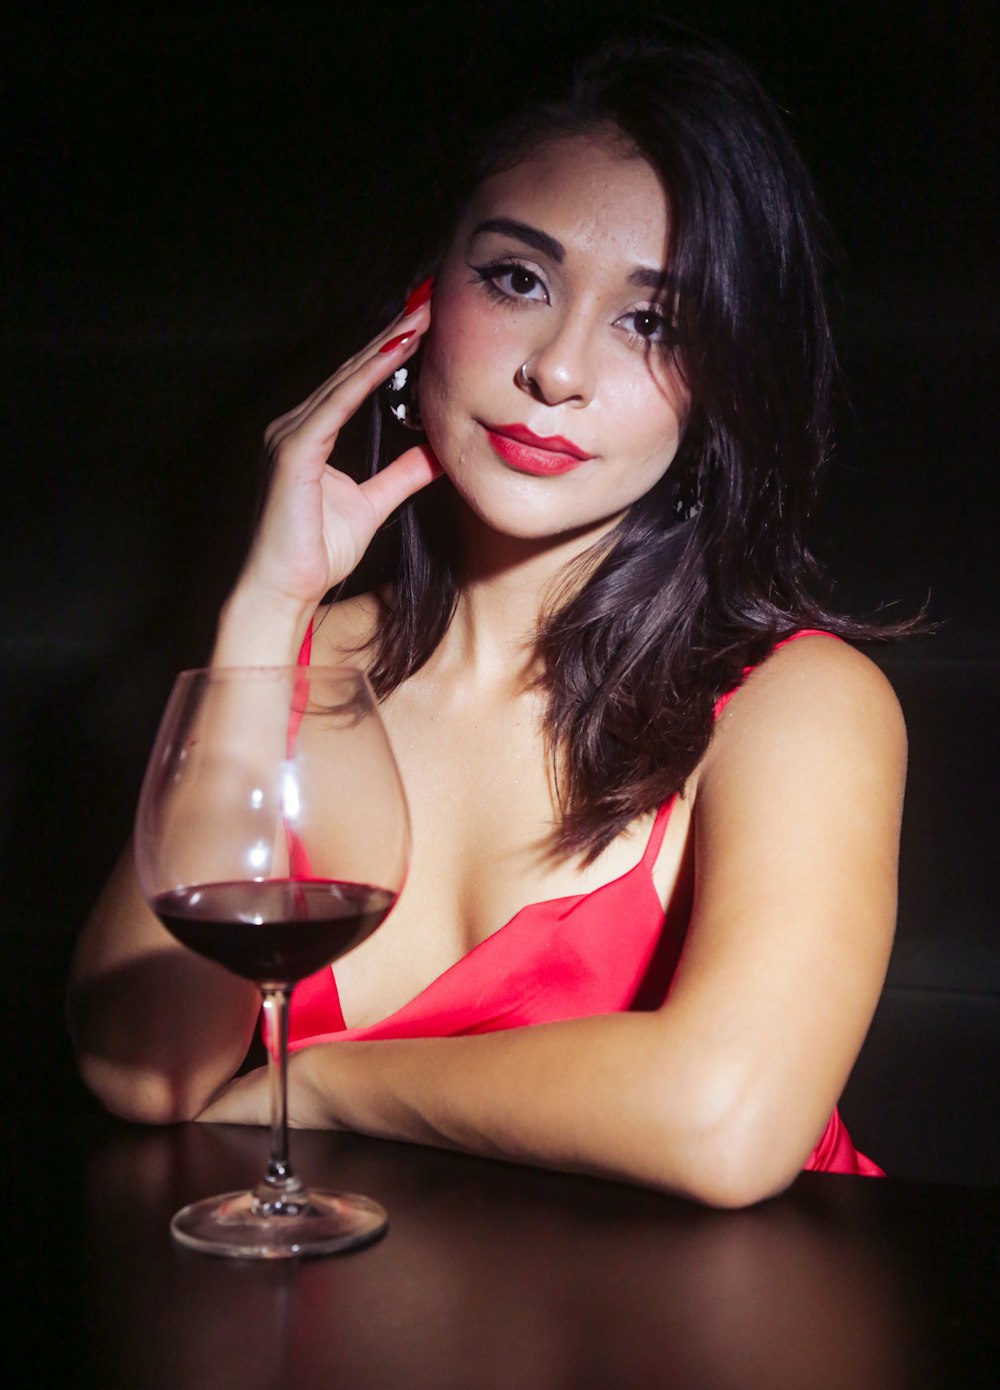 woman in red tank top holding wine glass